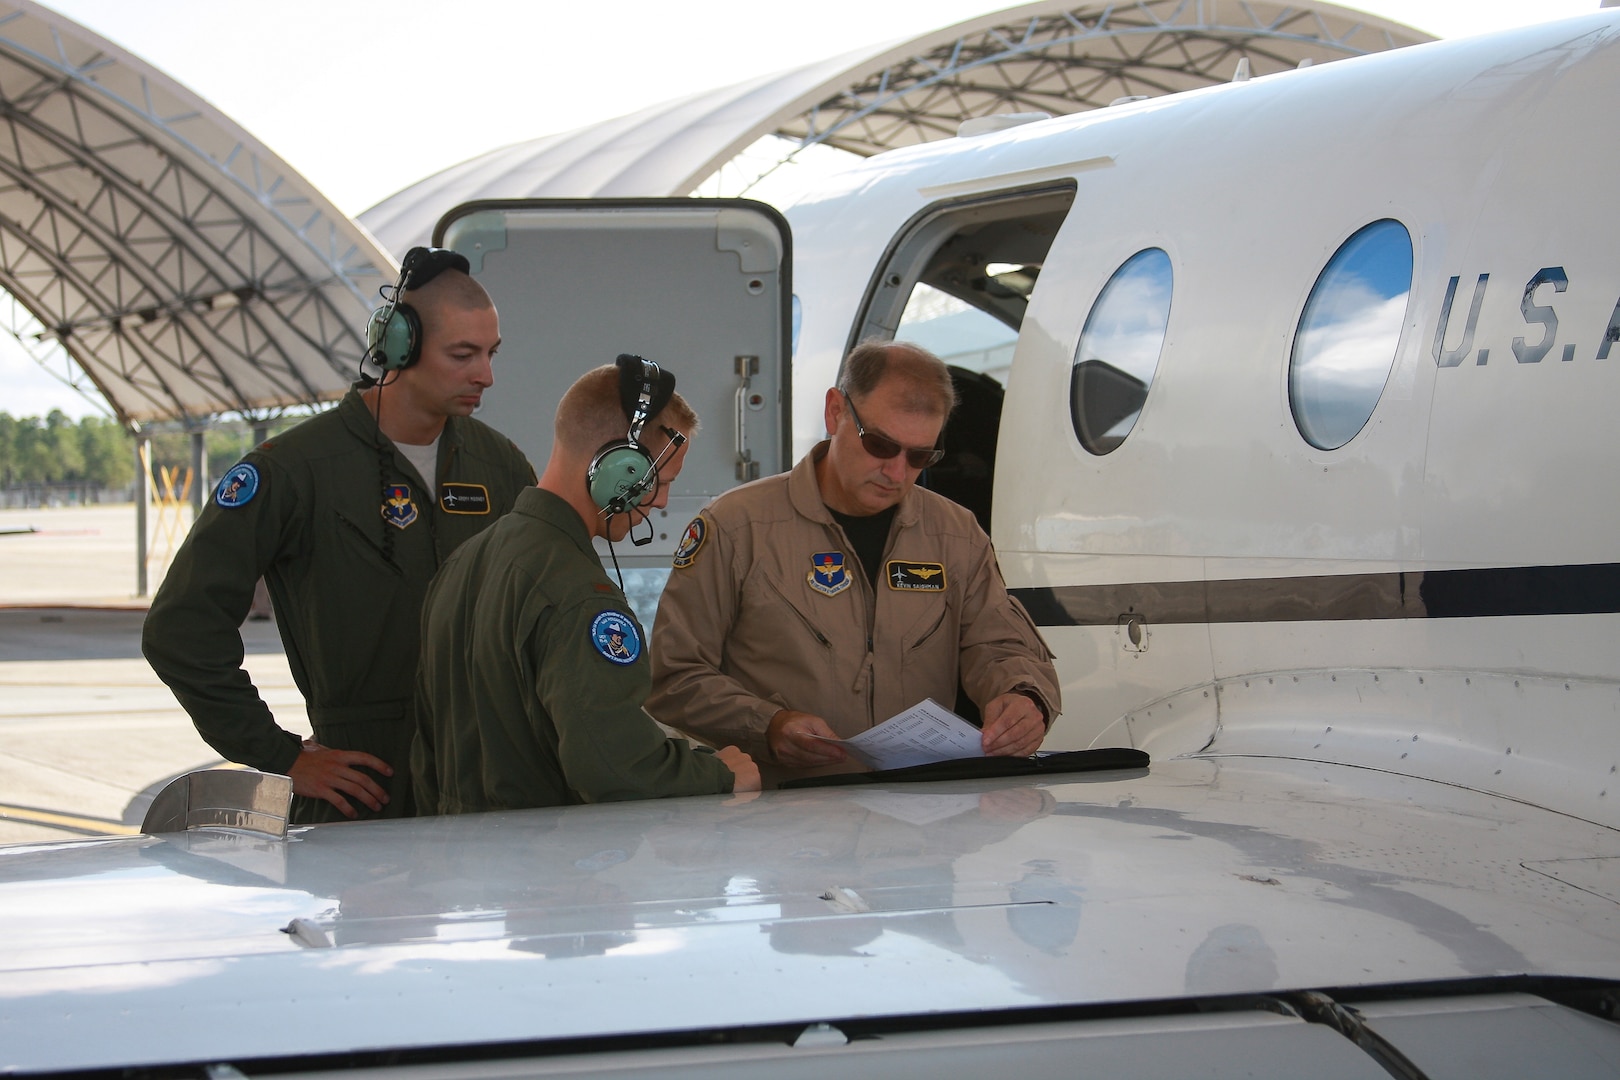 Second Lts. Jeremy Mooneyand Chad James, and Mr. Kevin Salonman, all of the 451st Flying Training Squadron, go over mission information prior to the first flight of the modified T-1 Jayhawk aircraft June 4, 2013 at Naval Air Station Pensacola, Fla. The aircraft has been modified for electronic warfare training, marking the first time in Air Force history that an undergraduate aviation program has formally incorporated the fundamentals of electronic warfare in flight into their syllabus.  (U.S. Air Force photo by Airman 1st Class Kailyn Cabrera)